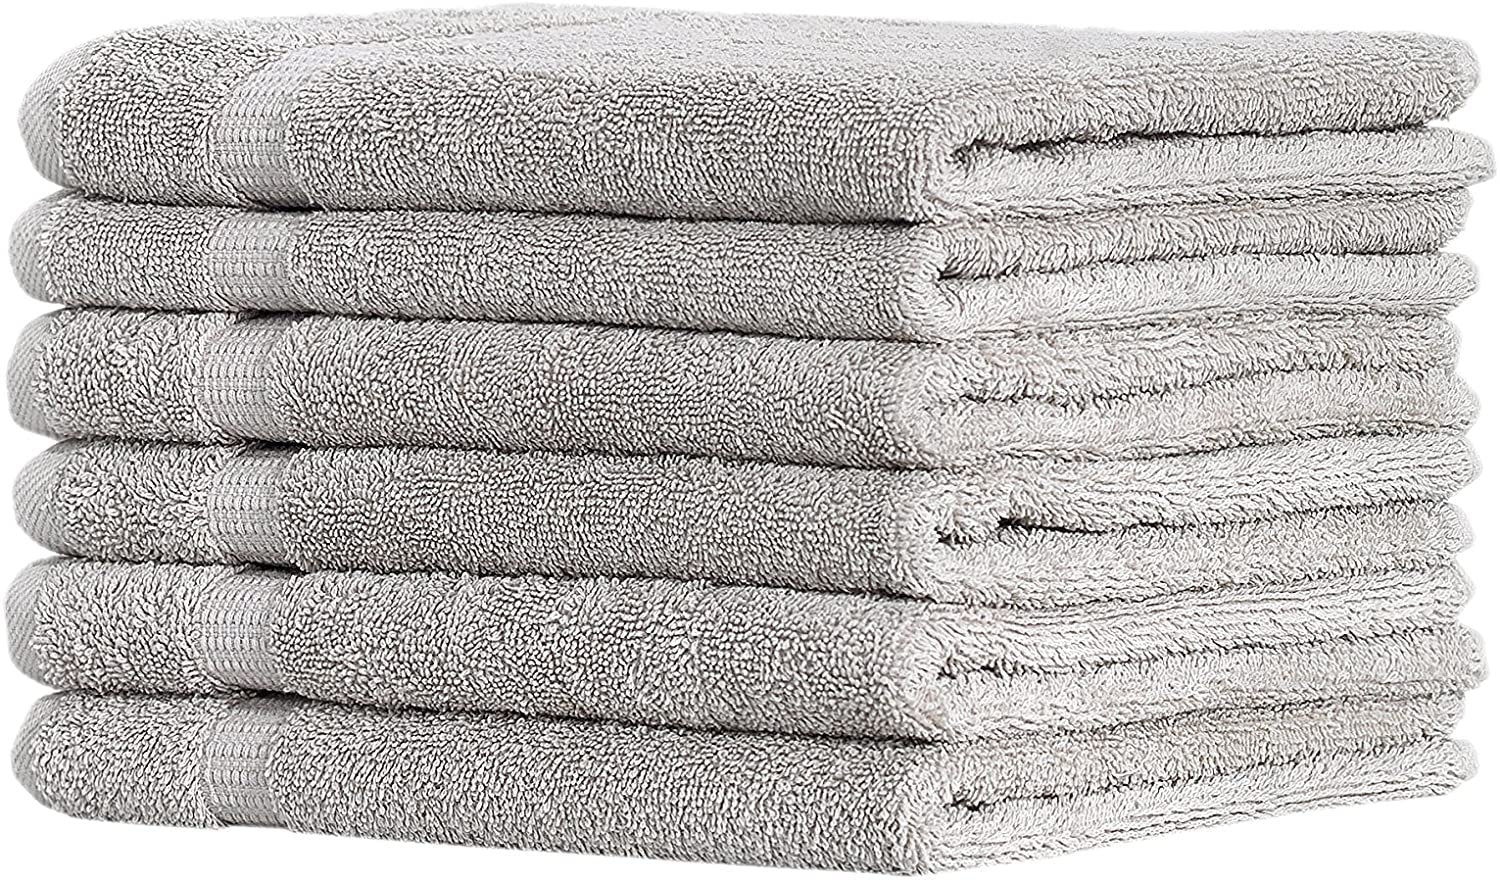 White Classic Luxury 100% Cotton Hand Towels Set of 6 - 16x30 Light-Grey